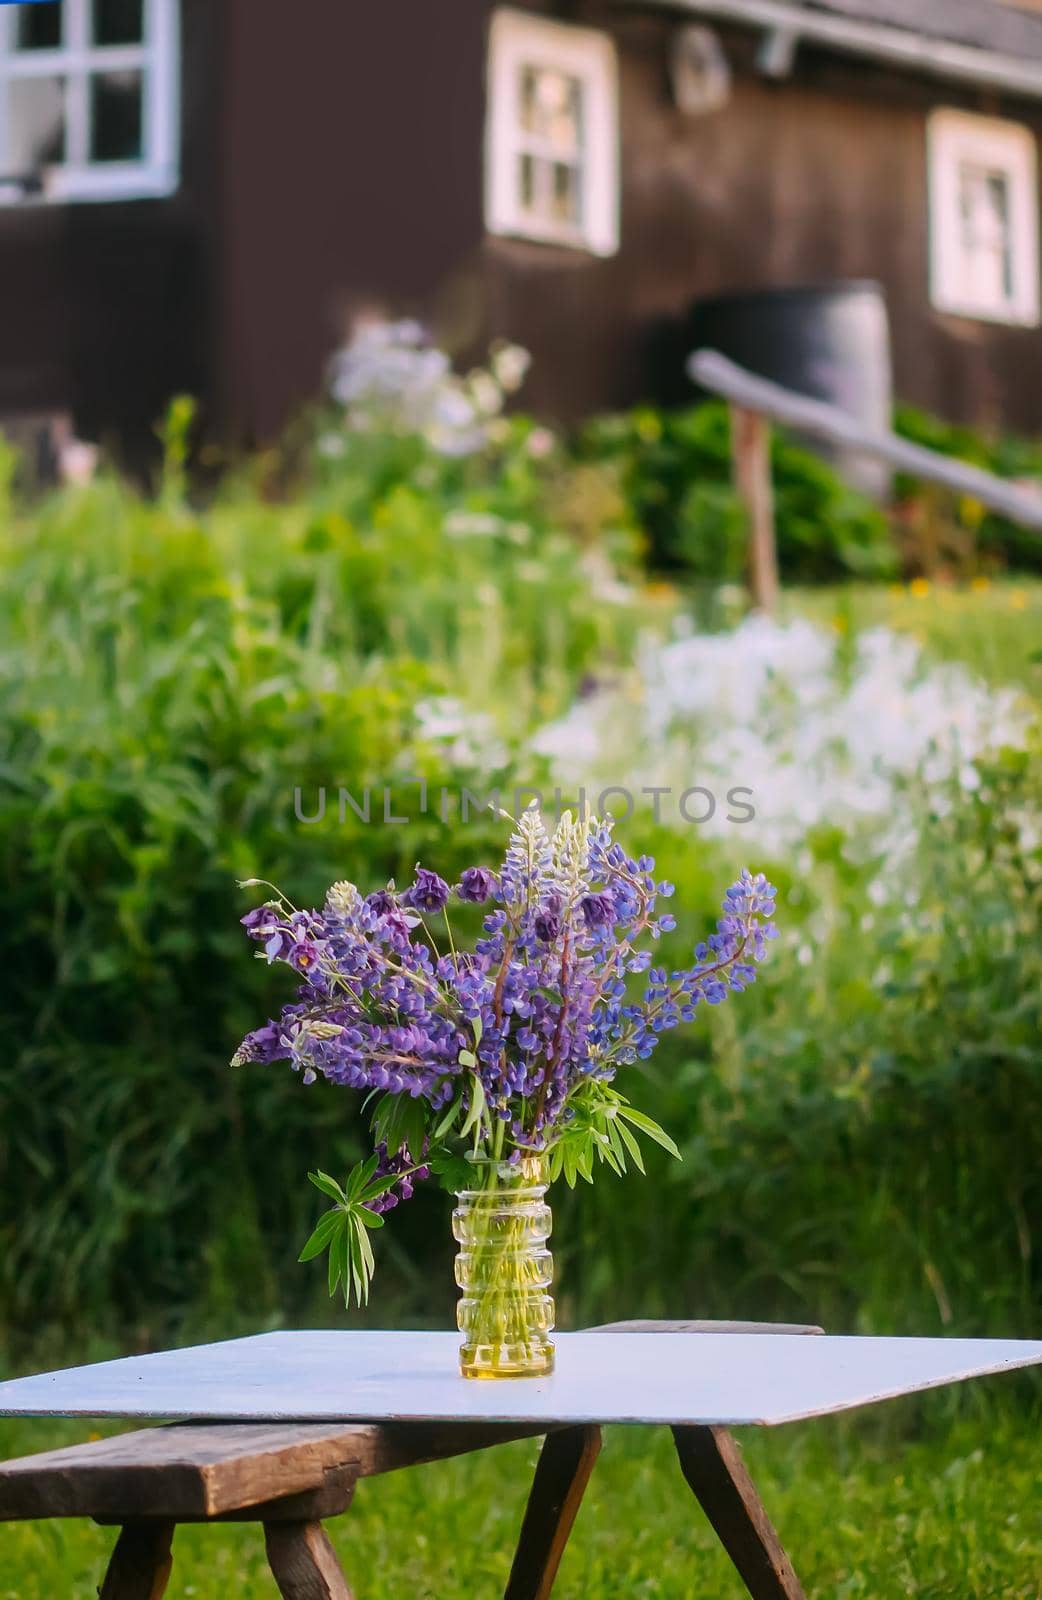 Bouquet of summer flowers on rural house background outdoors. Large-leaved or Bigleaf Lupine purple flowers. Lupinus polyphyllus plants.